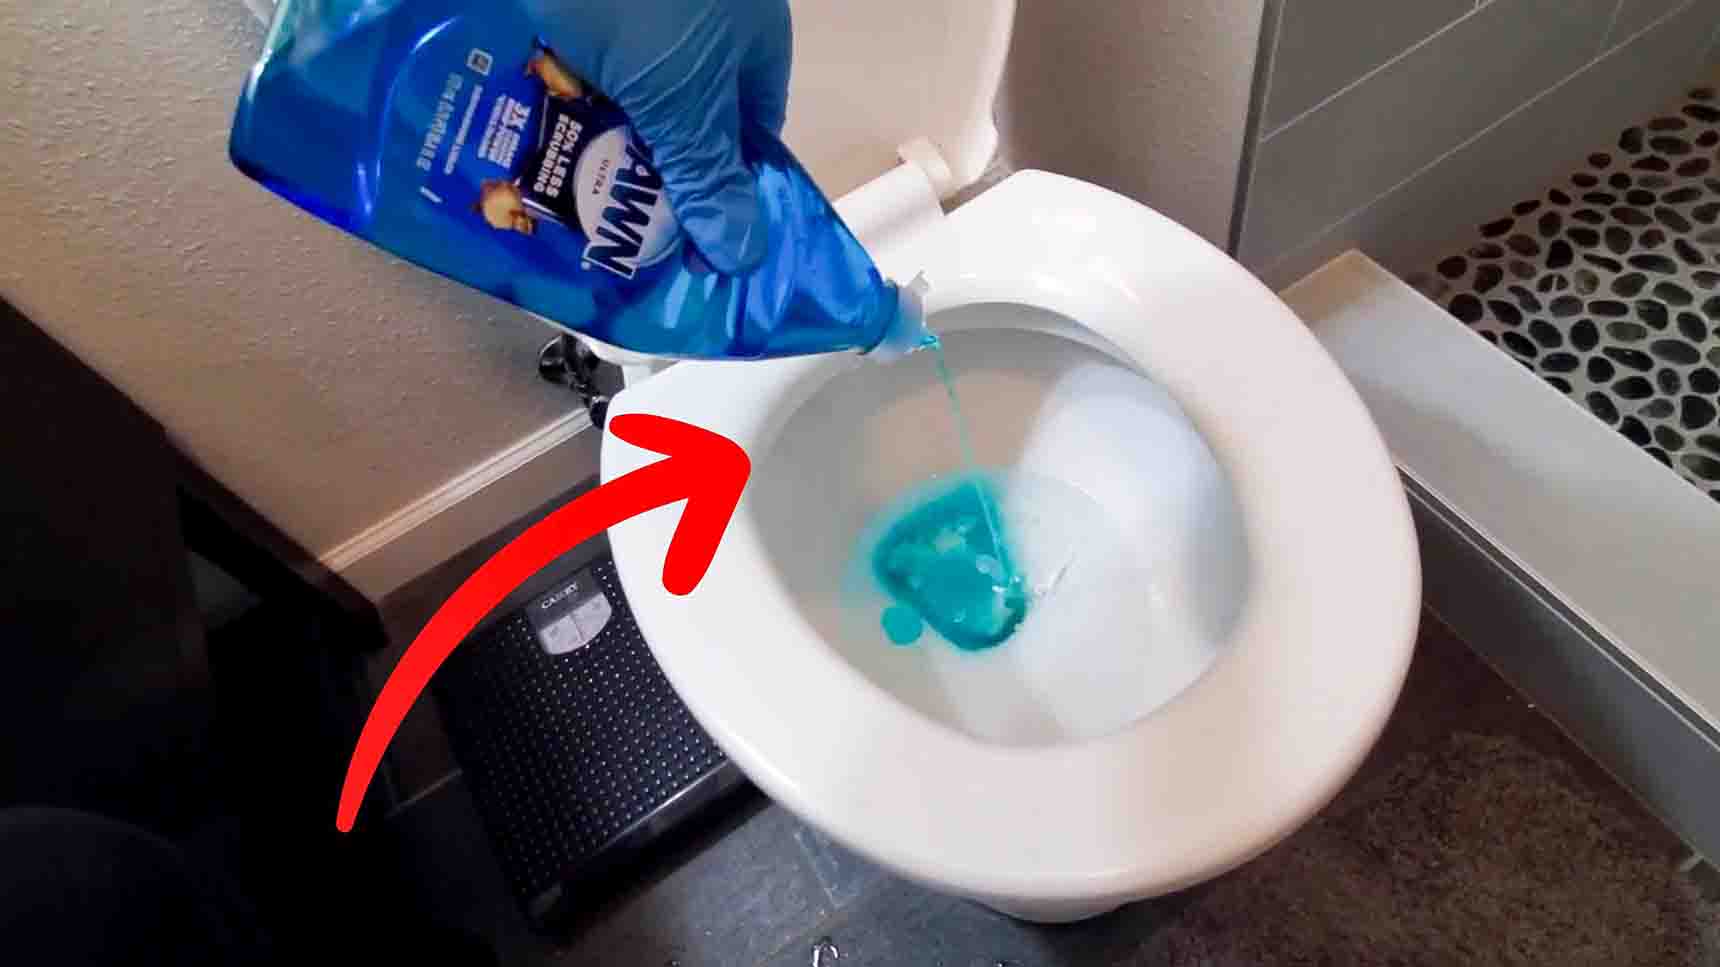 5 Ways to Unclog a Toilet Without a Plunger